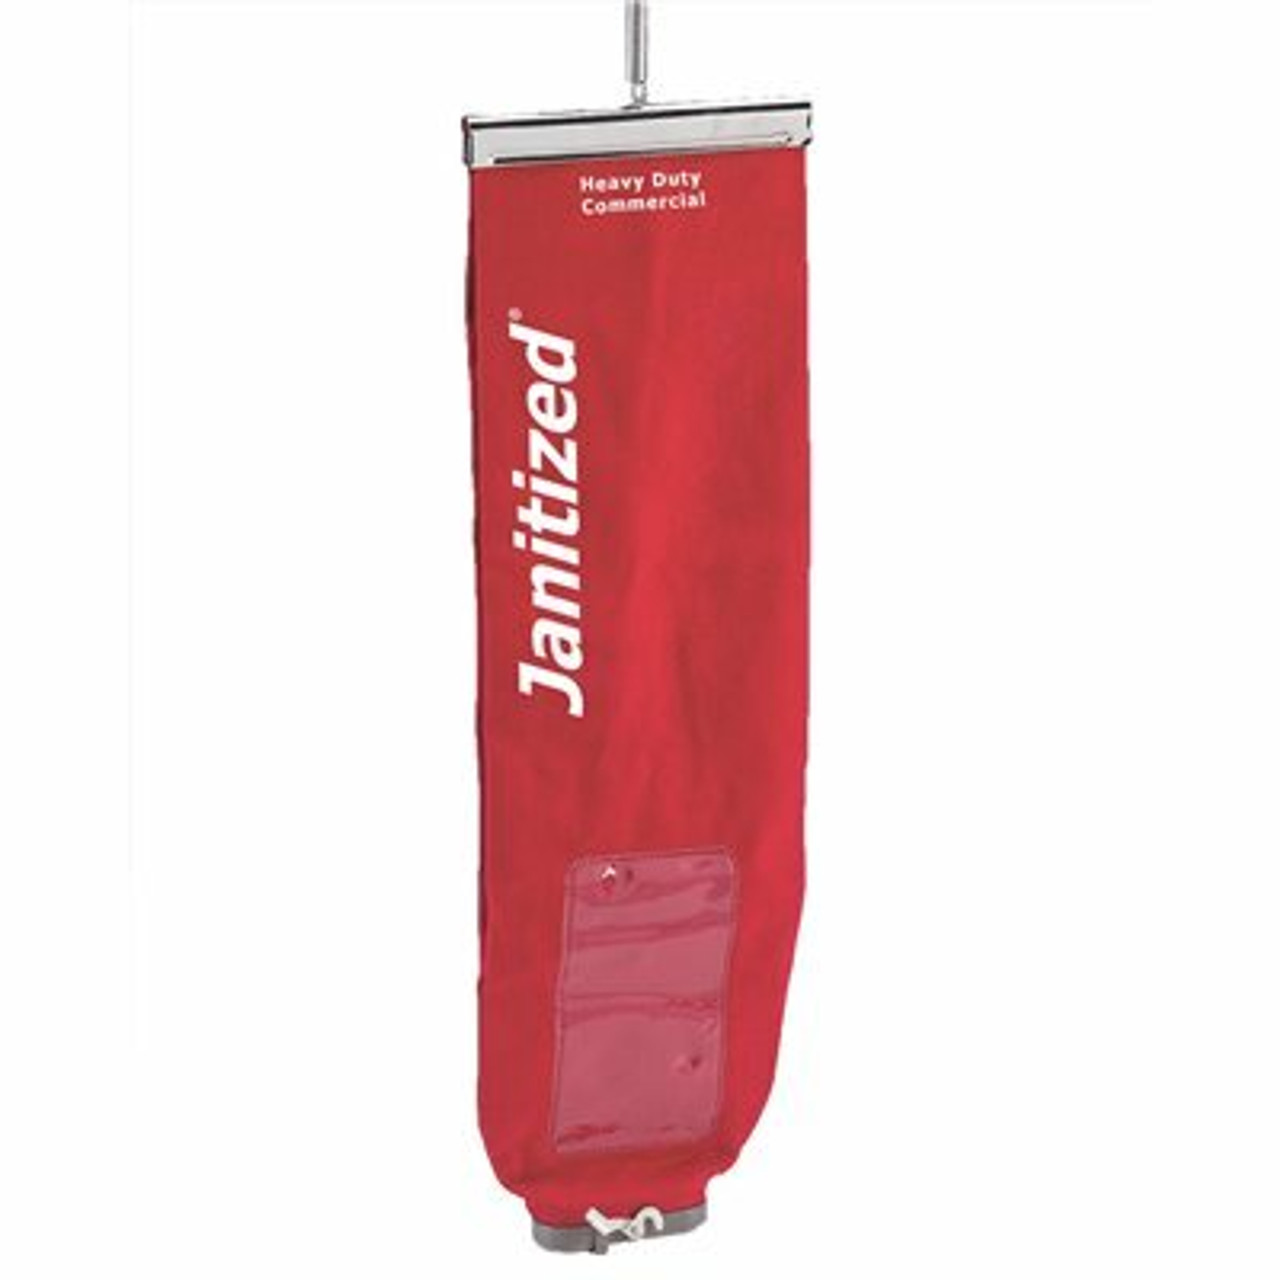 Janitized Red Cotton/Sms Lined Upright Cloth Bag For Eureka Sanitaire With Lock, Top Load, No Zipper, Equivalent To 53354-3